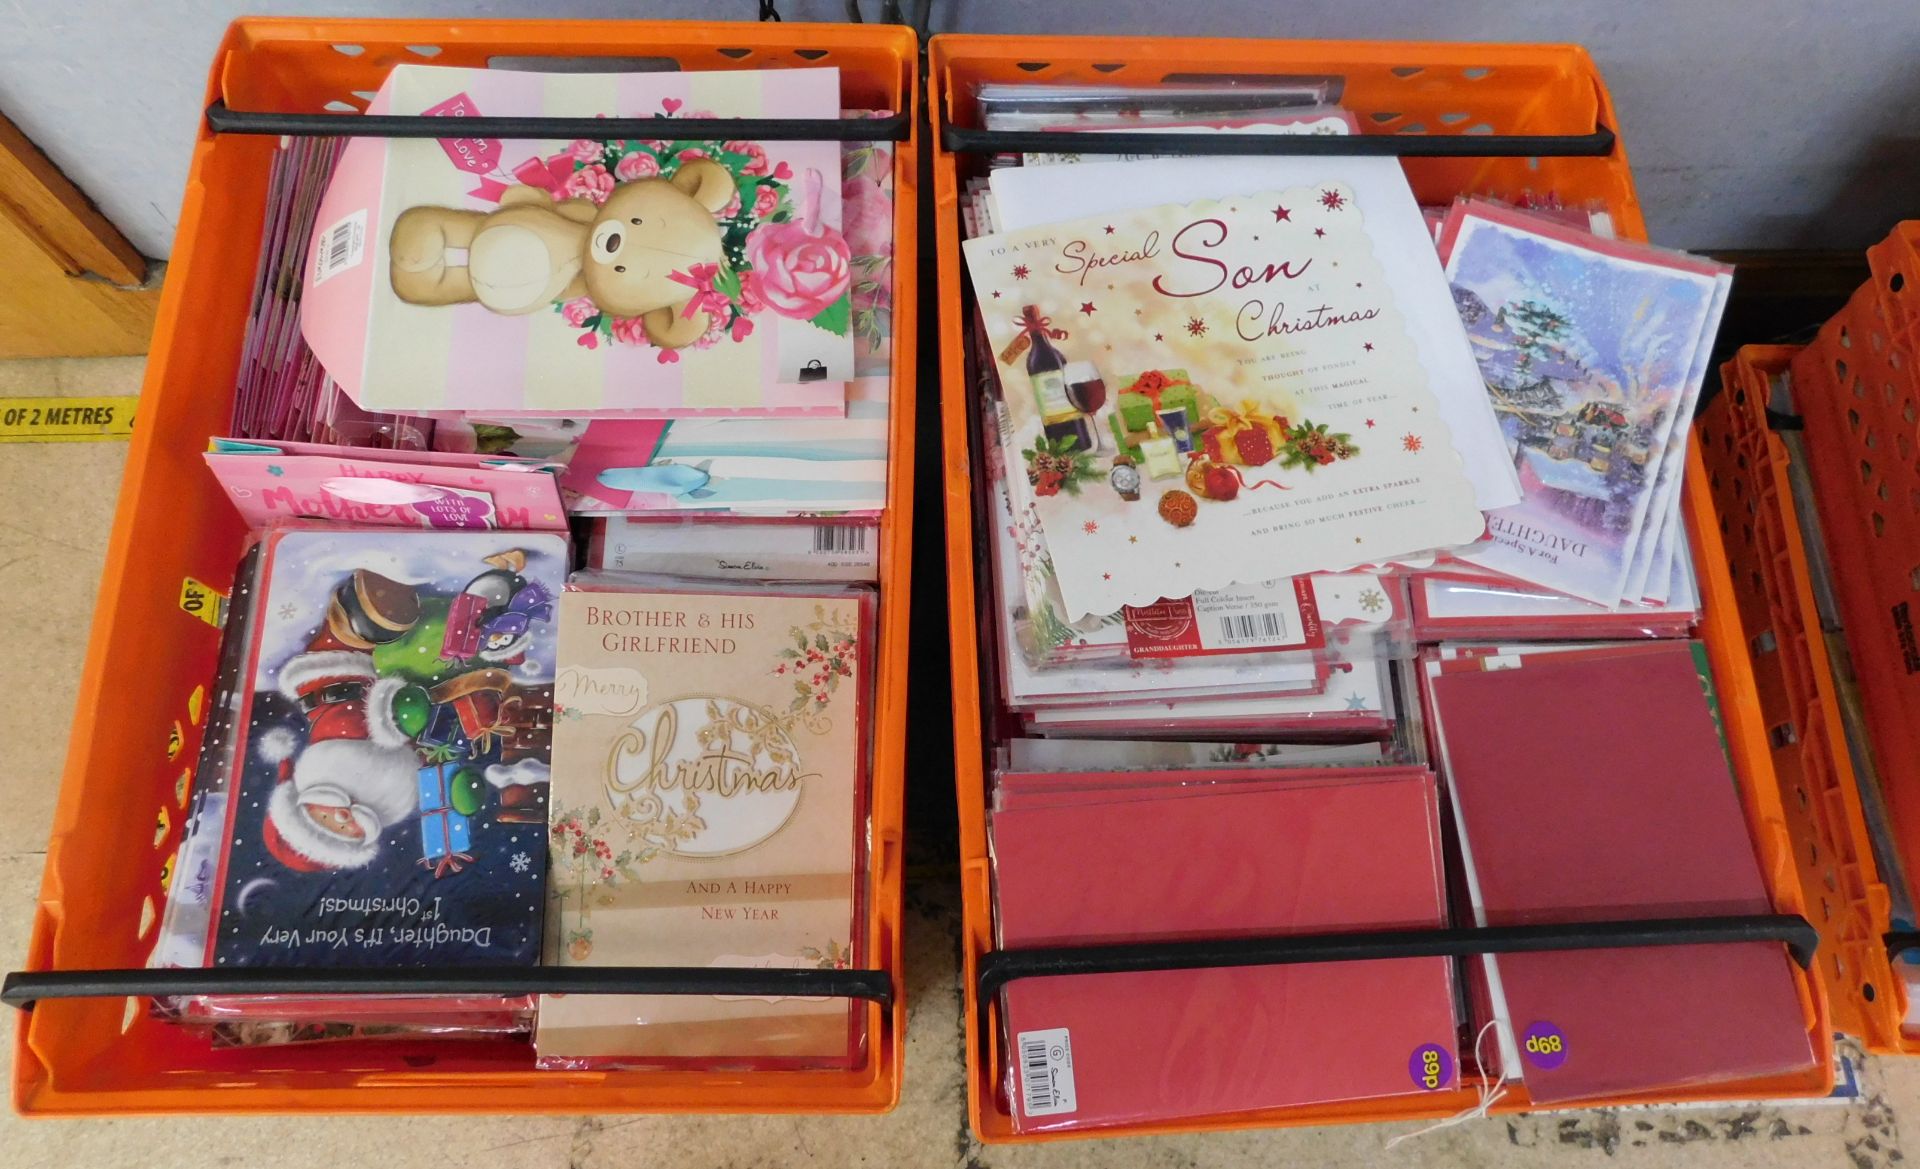 Contents of 8 Crates to Include Everyday Greetings Cards (Crates Not Included, Buyers Must Bring - Image 3 of 5